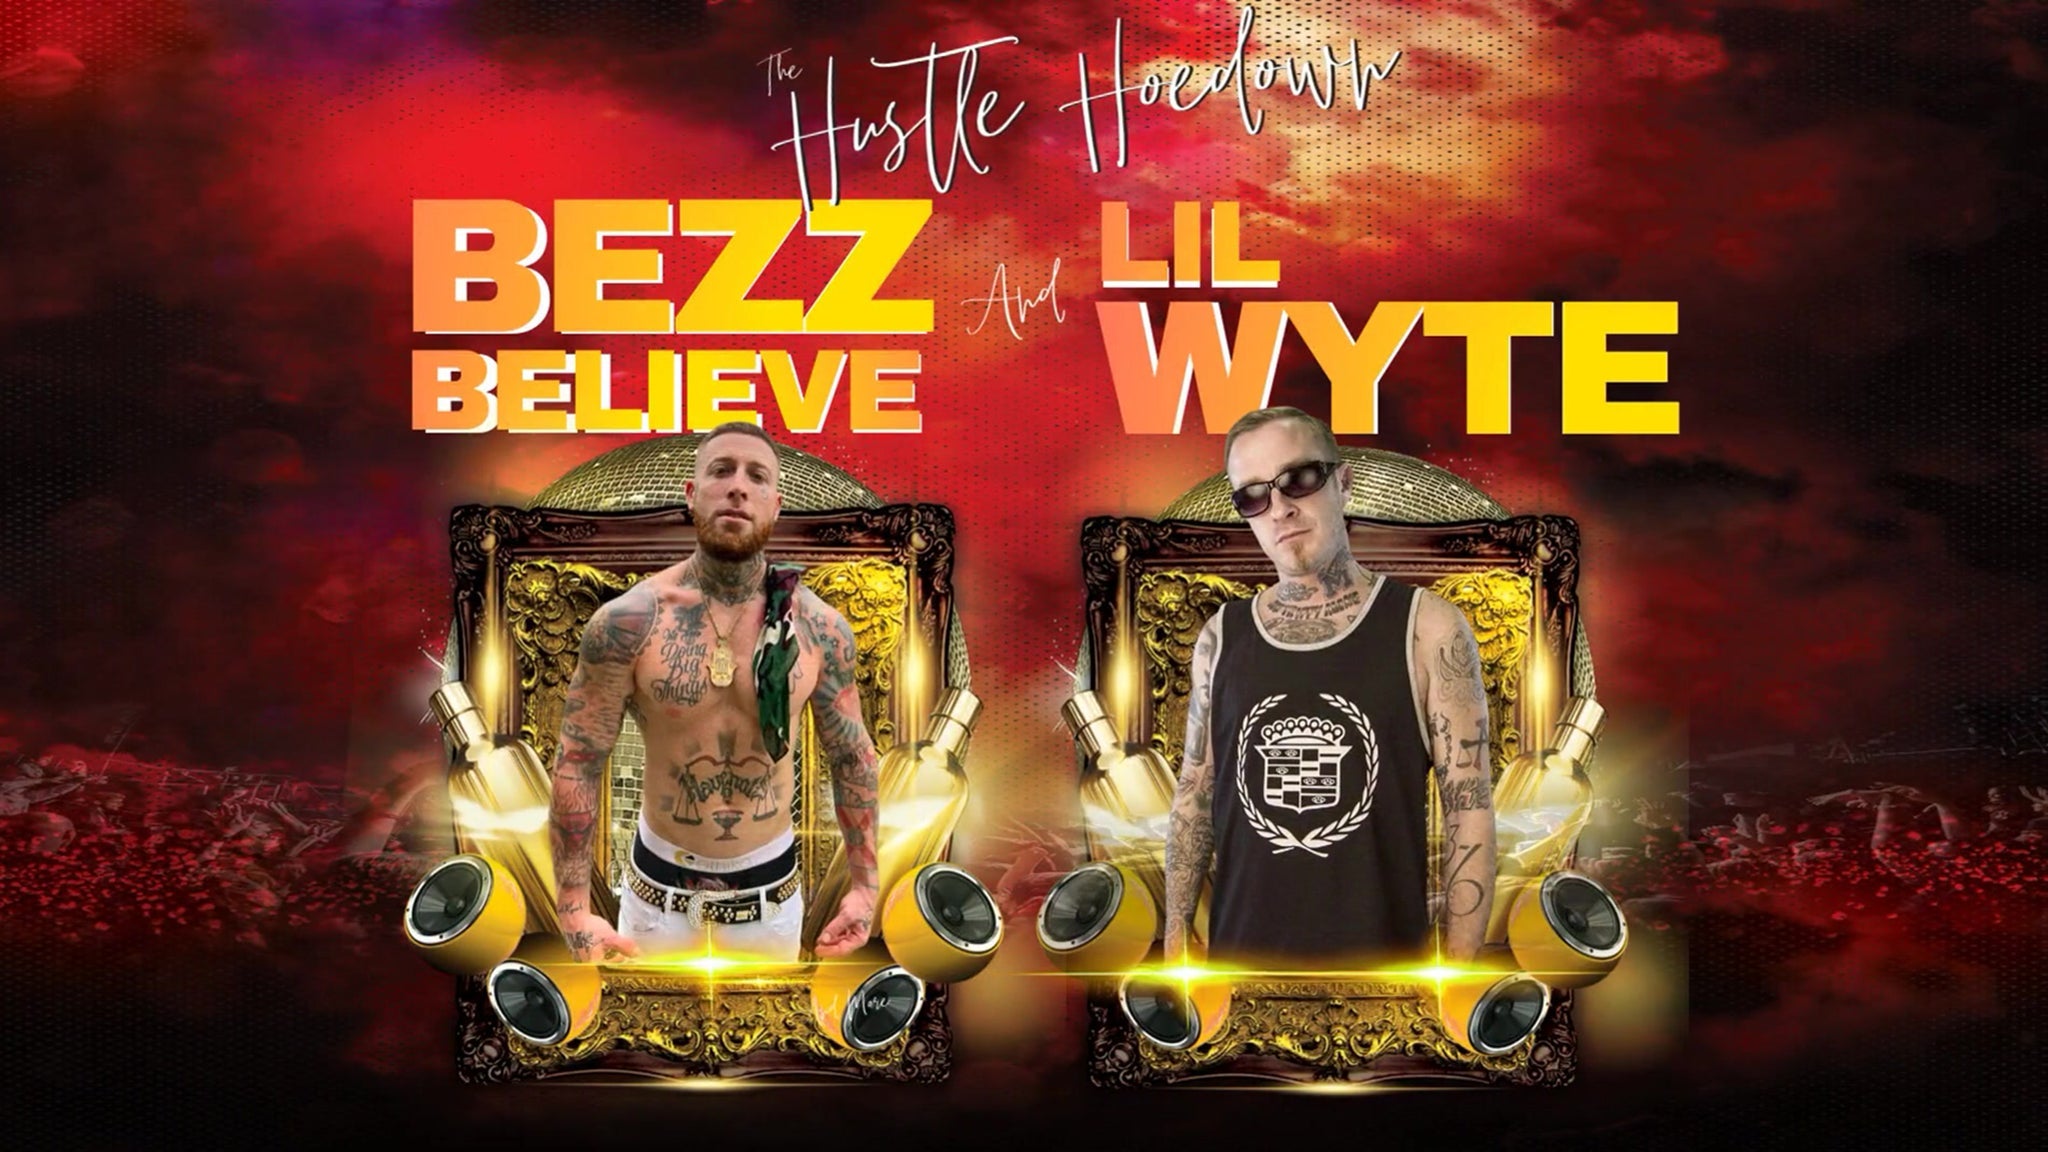 The Hustle Hoedown with Bezz Believe & Lil Wyte in Memphis promo photo for Ticket Deals presale offer code